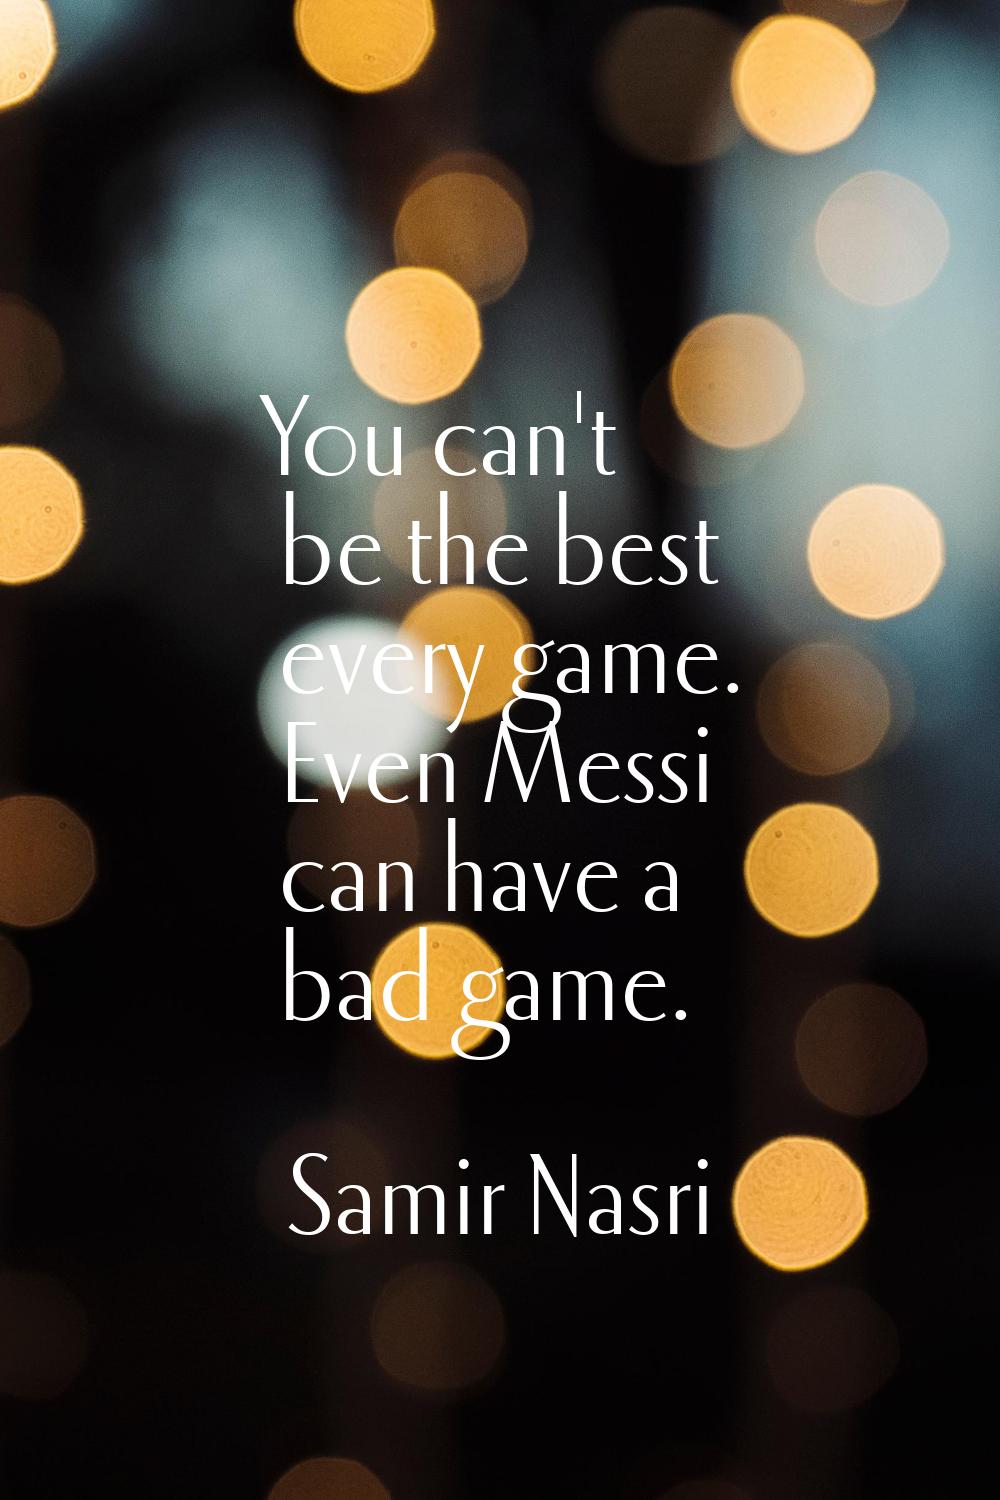 You can't be the best every game. Even Messi can have a bad game.